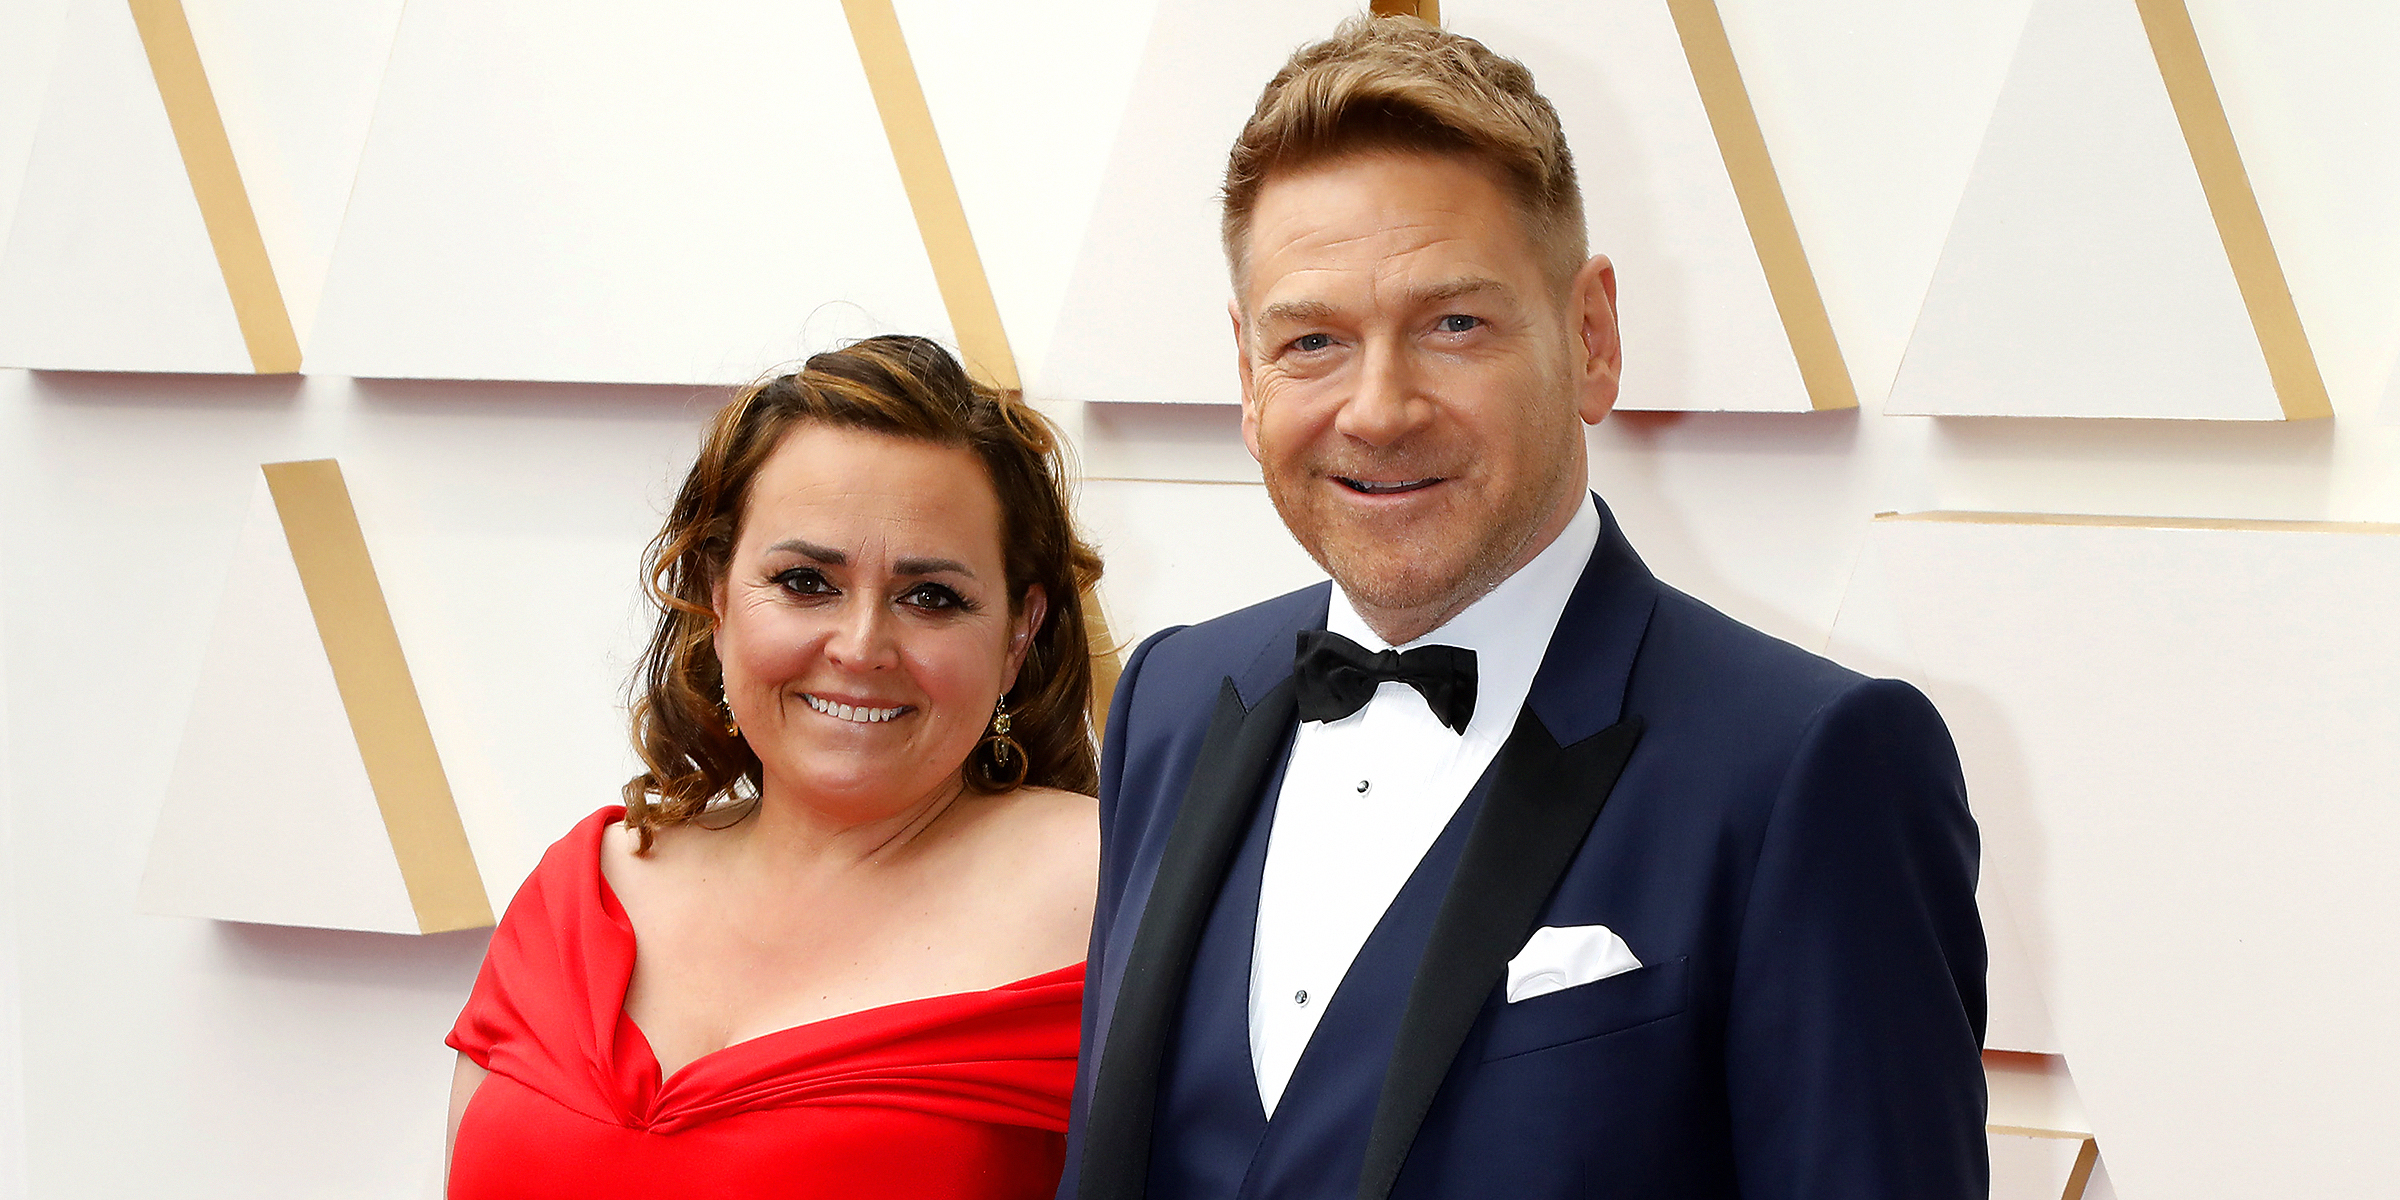 Lindsay Bronnock and Kenneth Branagh | Source: Getty Images